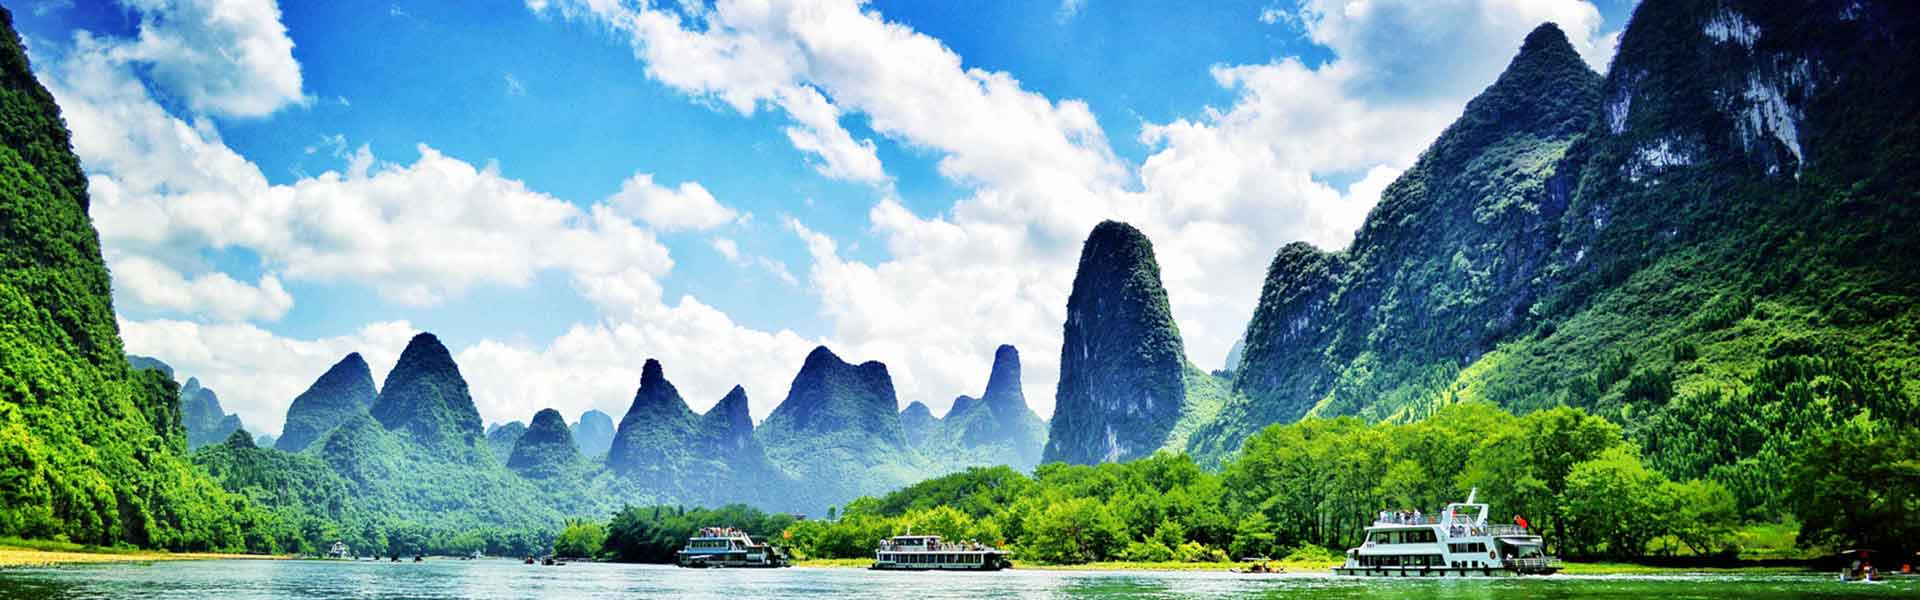 Guilin Day Tours